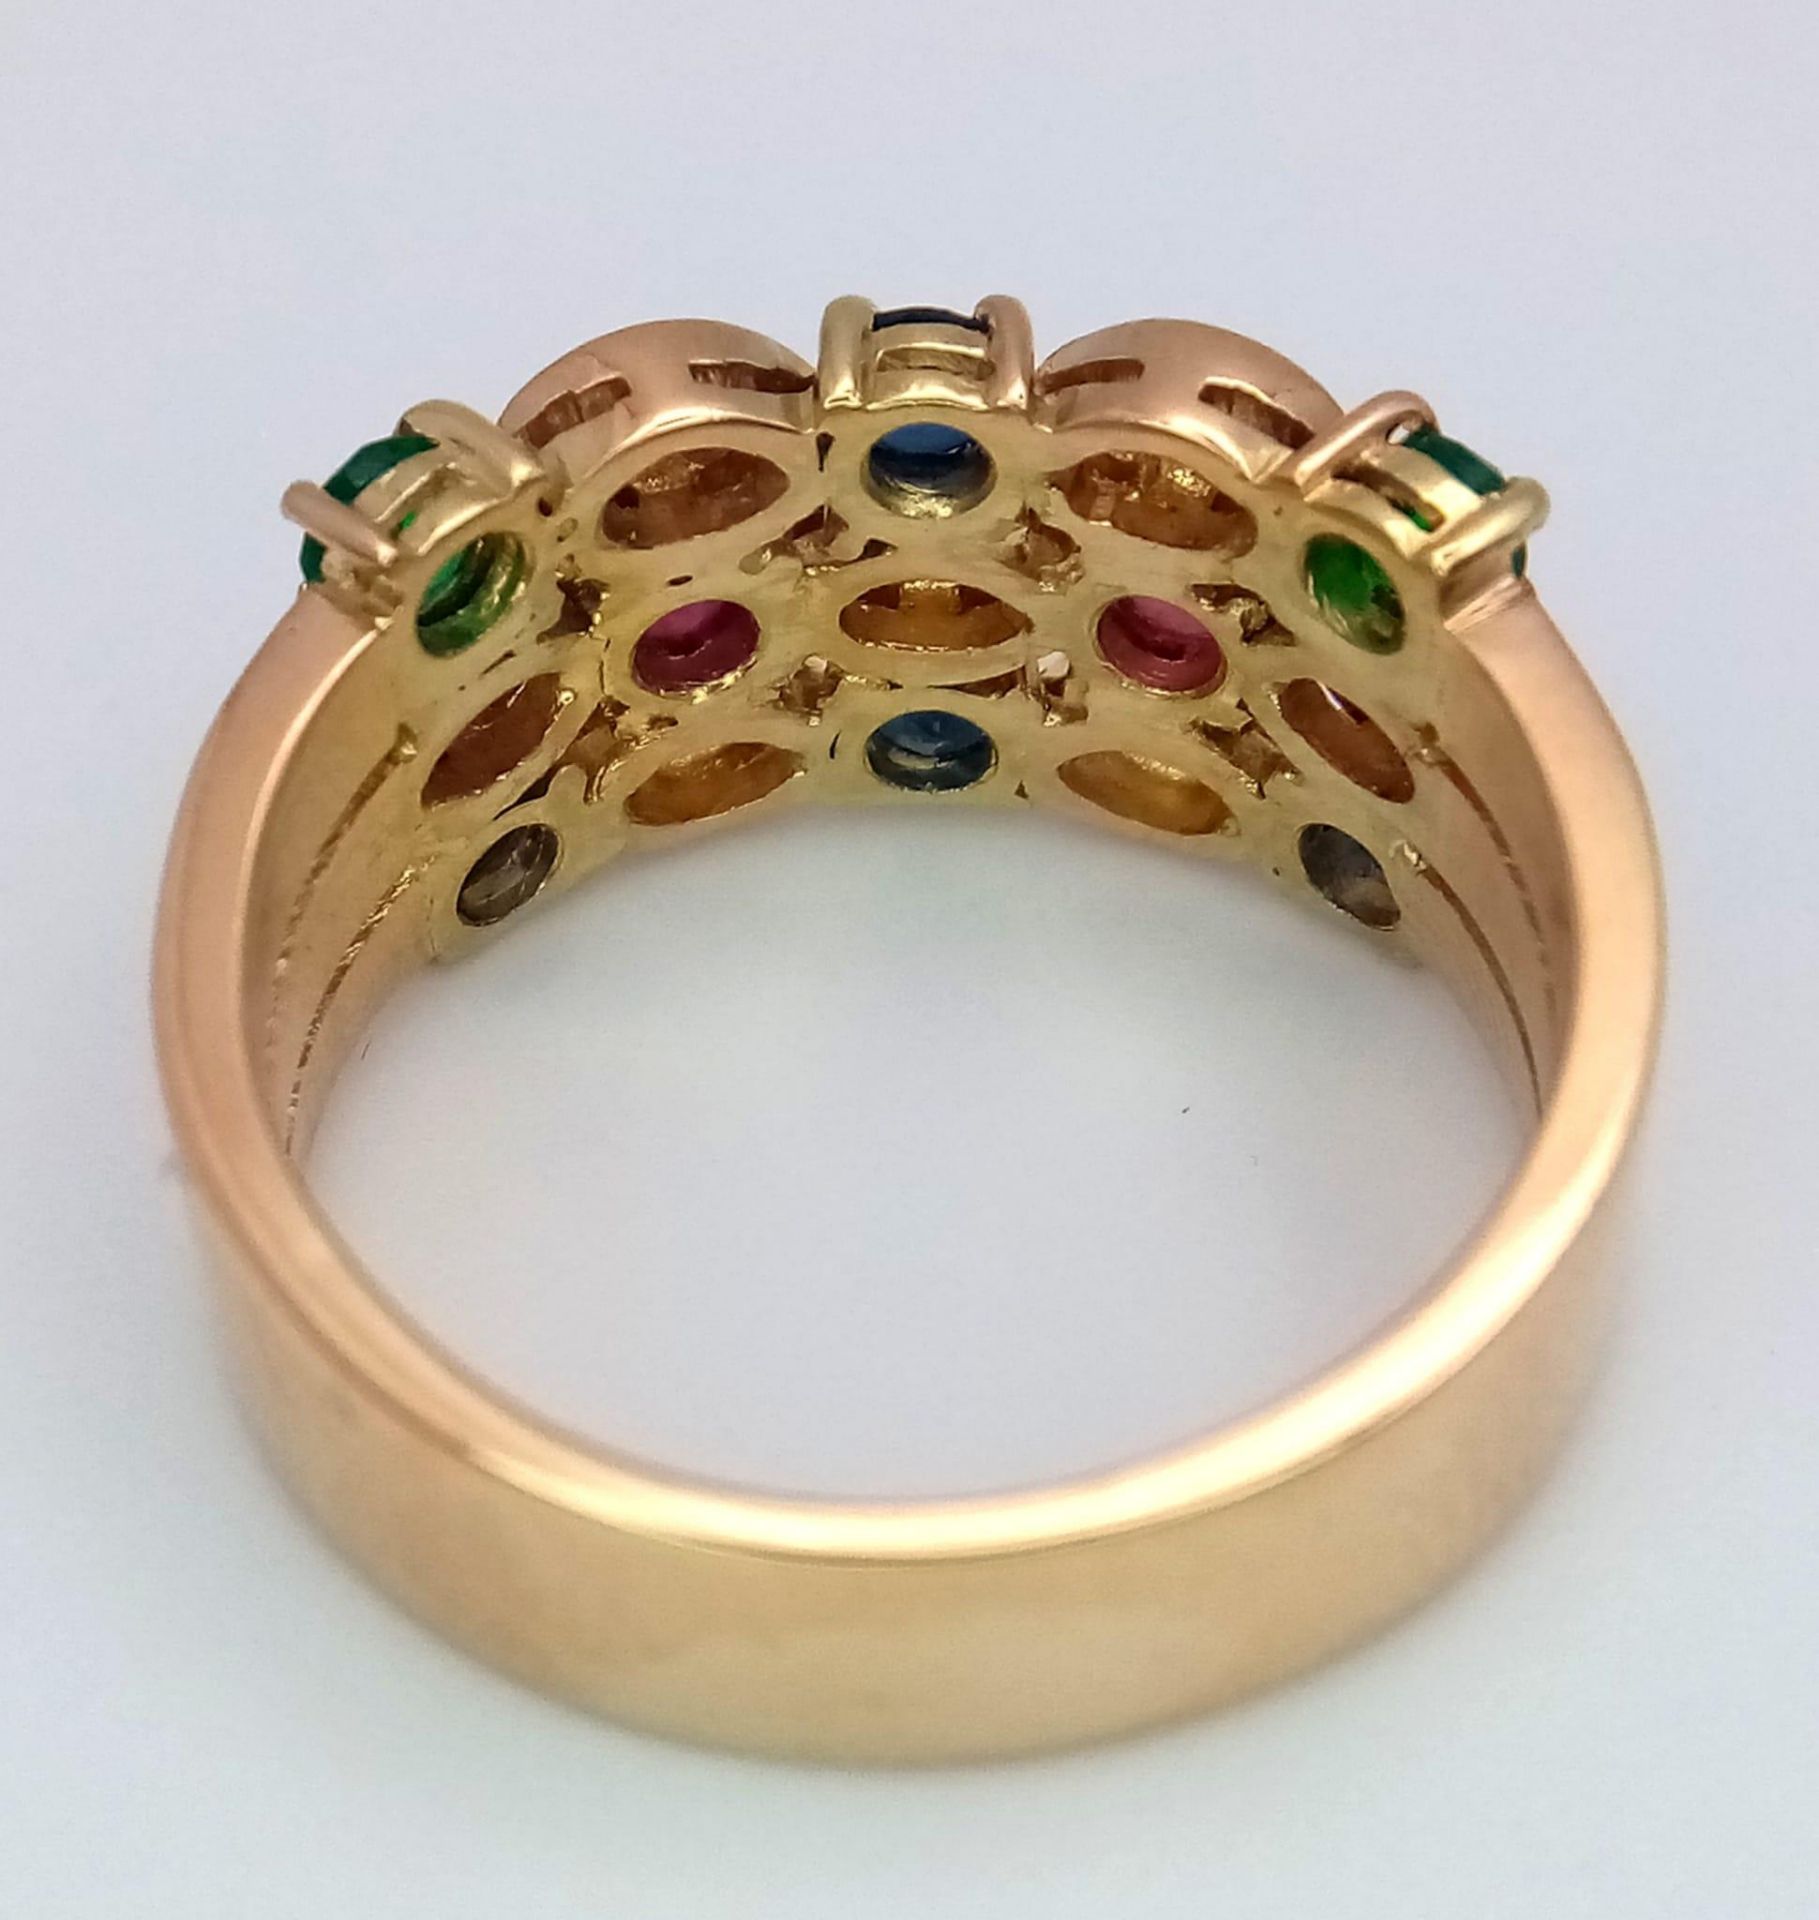 A 18K YELLOW GOLD DIAMOND, RUBY, SAPPHIRE & EMERALD SET RING 7.3G SIZE N 1/2 ref: 6441 - Image 4 of 5